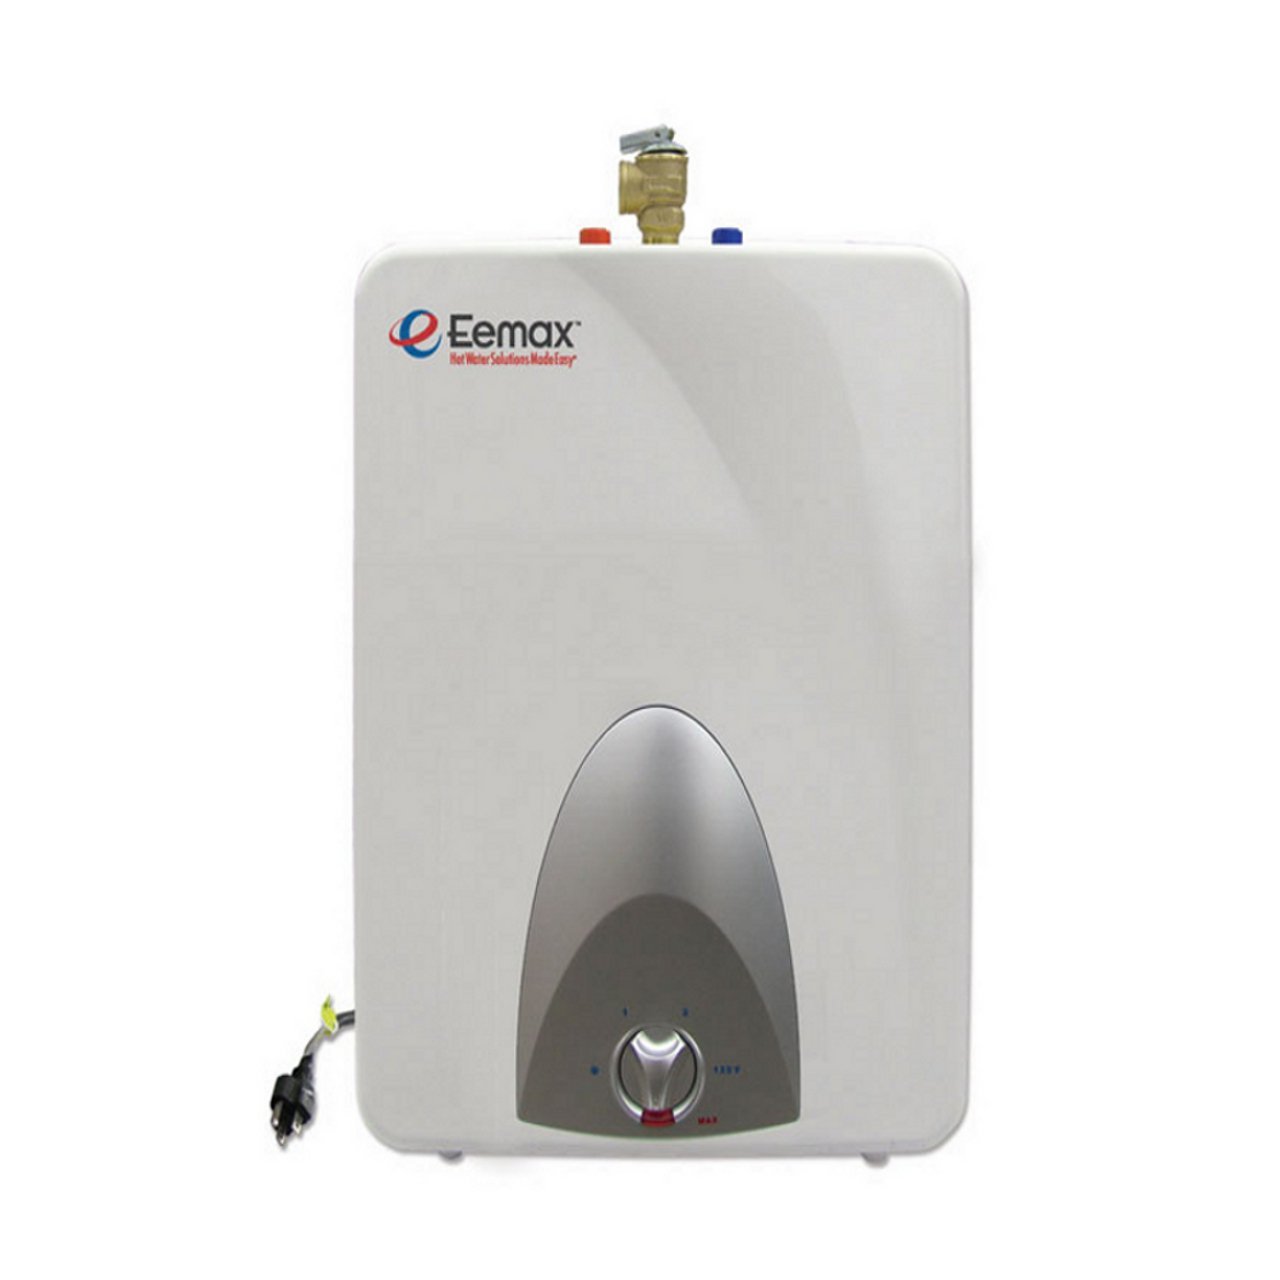 EEMAX EMT6 6GAL ELEC. UTILITY WATER HEATER,120V,3/4&quot;MALE 